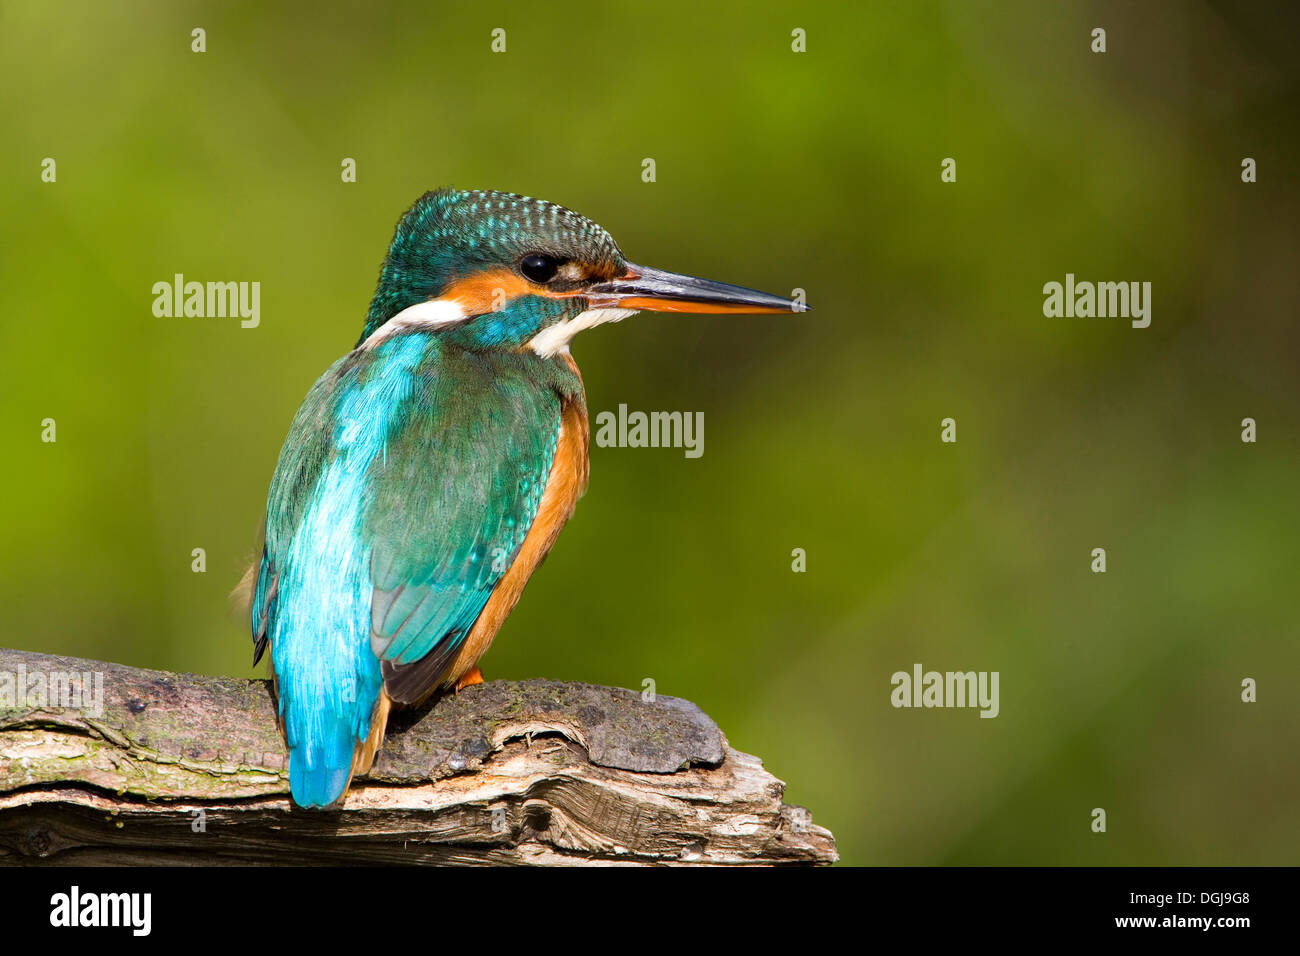 A colourful kingfisher perched on a branch. Stock Photo